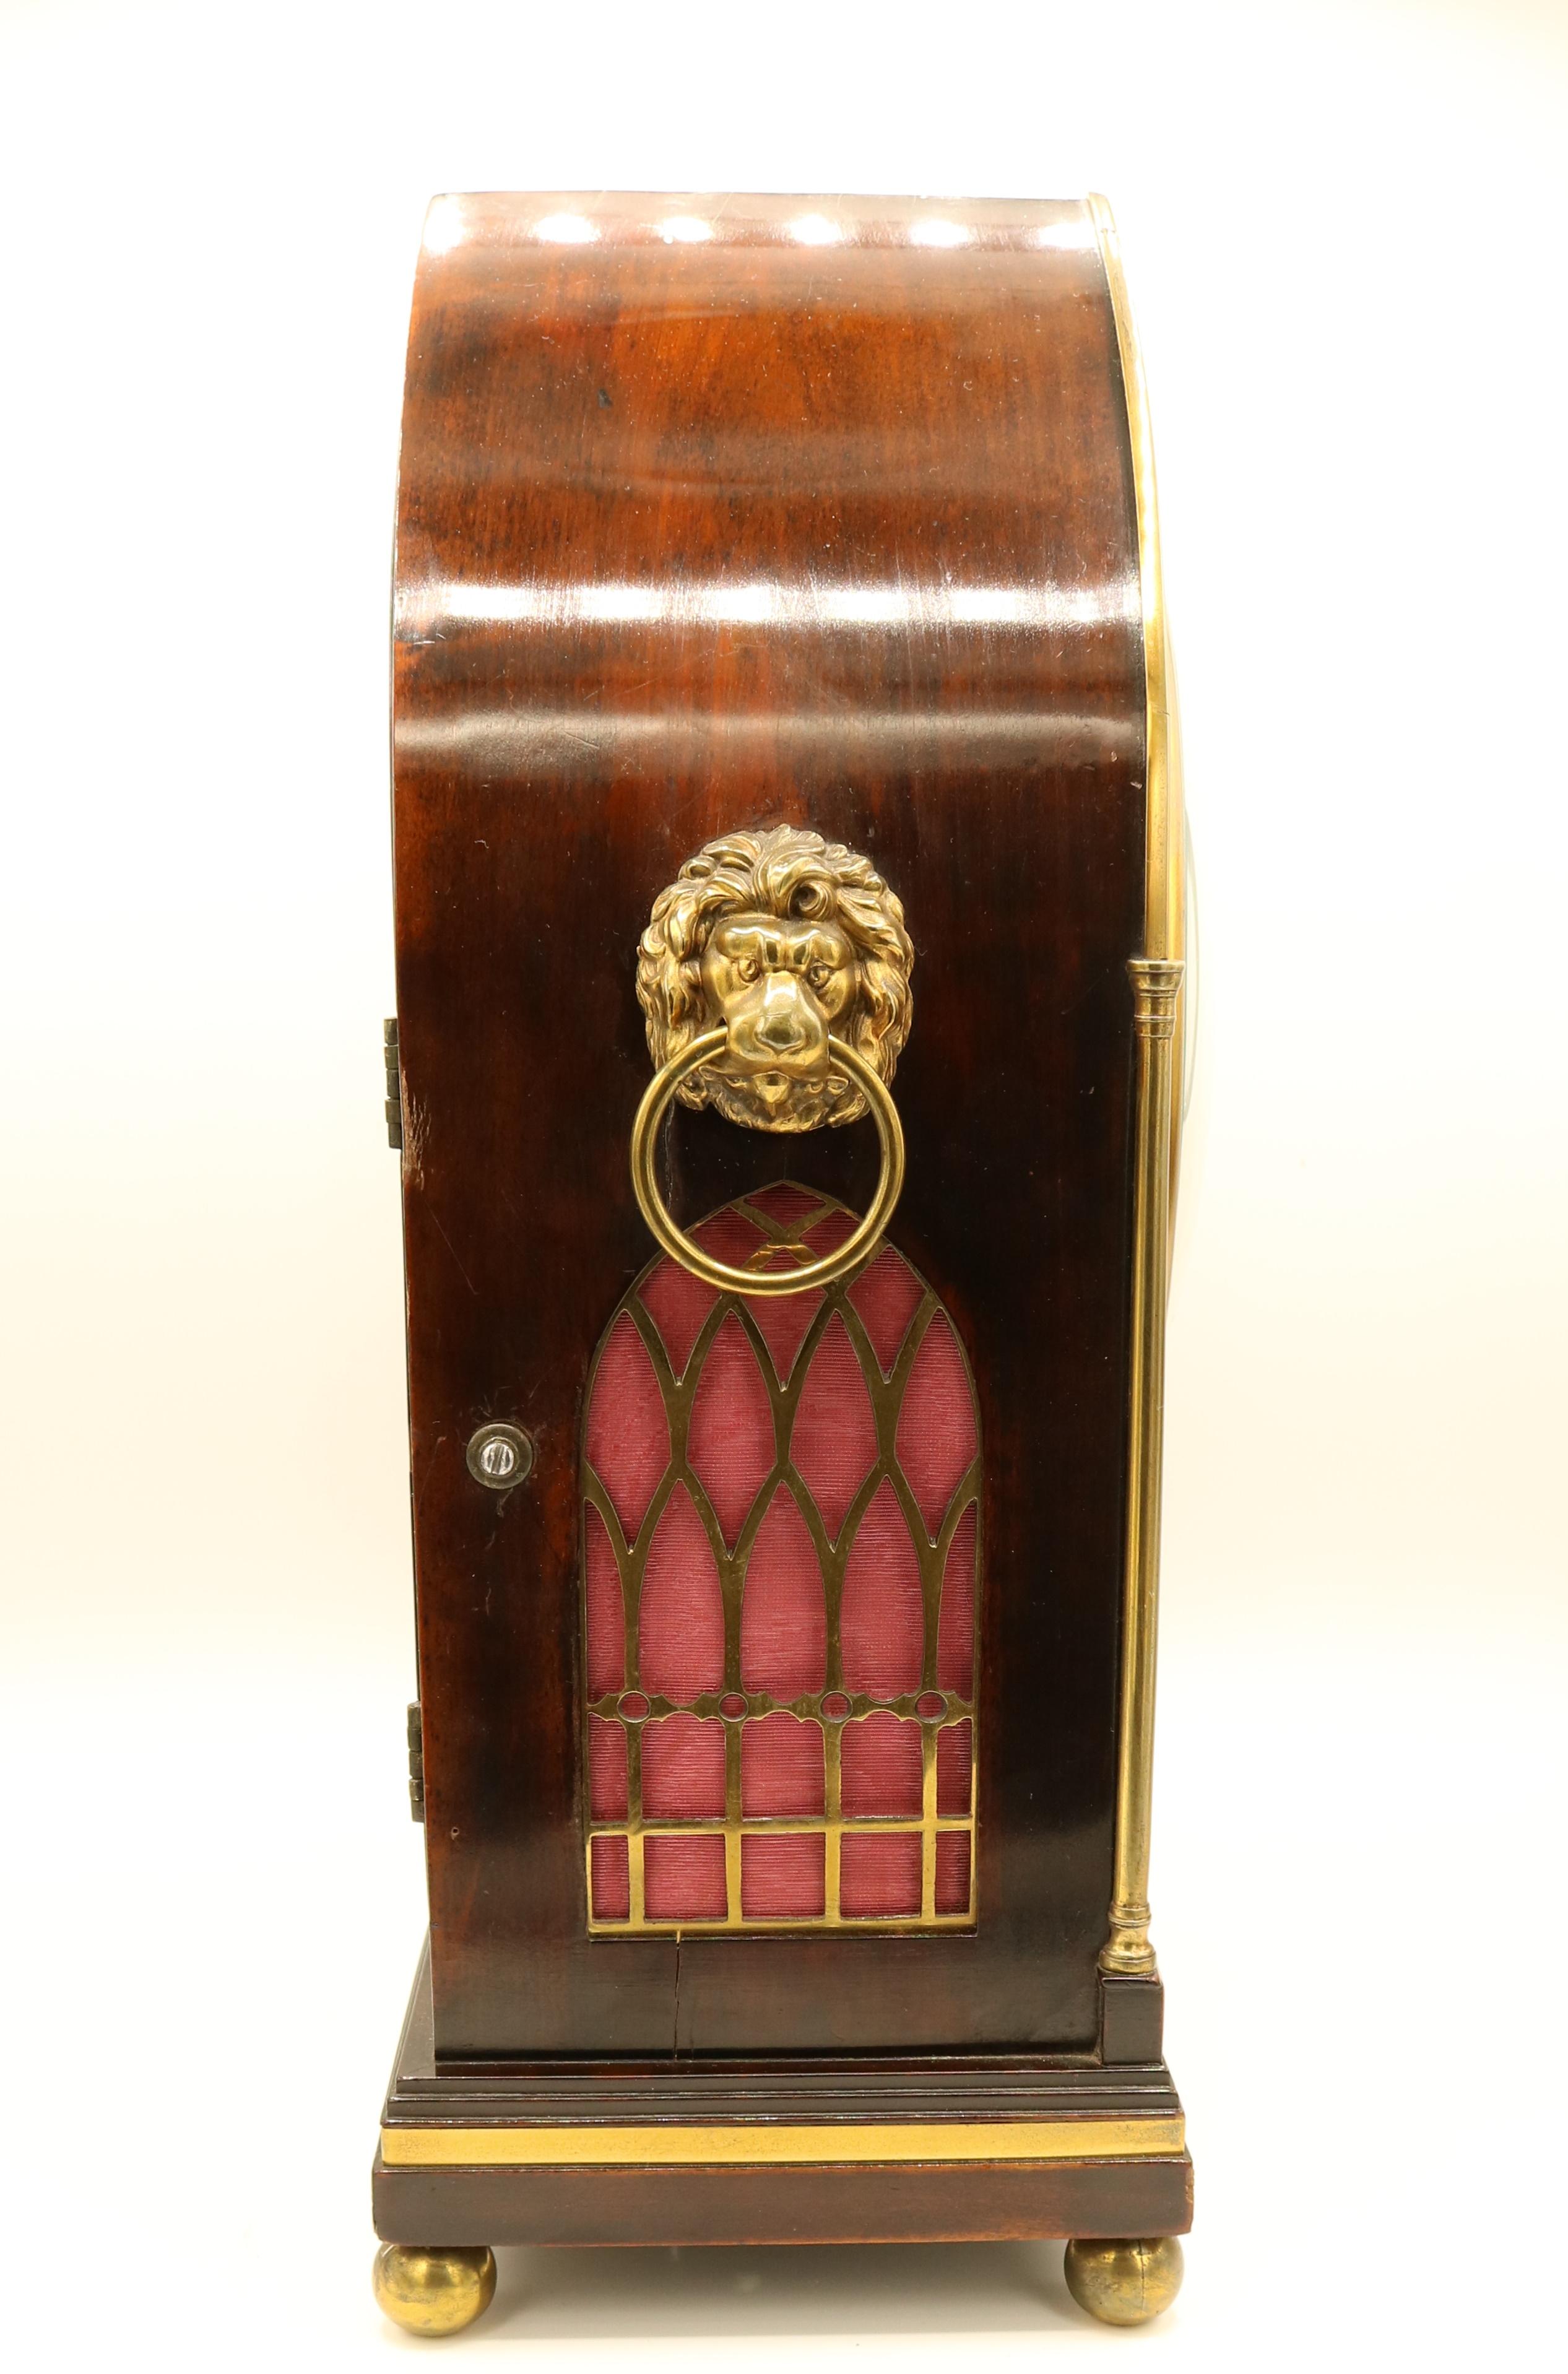 An early 19th century Regency period figured mahogany bracket clock, having 8-day striking movement with painted dial (internal backplate stamped ‘Handley & Moore’) contained in lancet-shaped brass mounted case with column corners and lions head